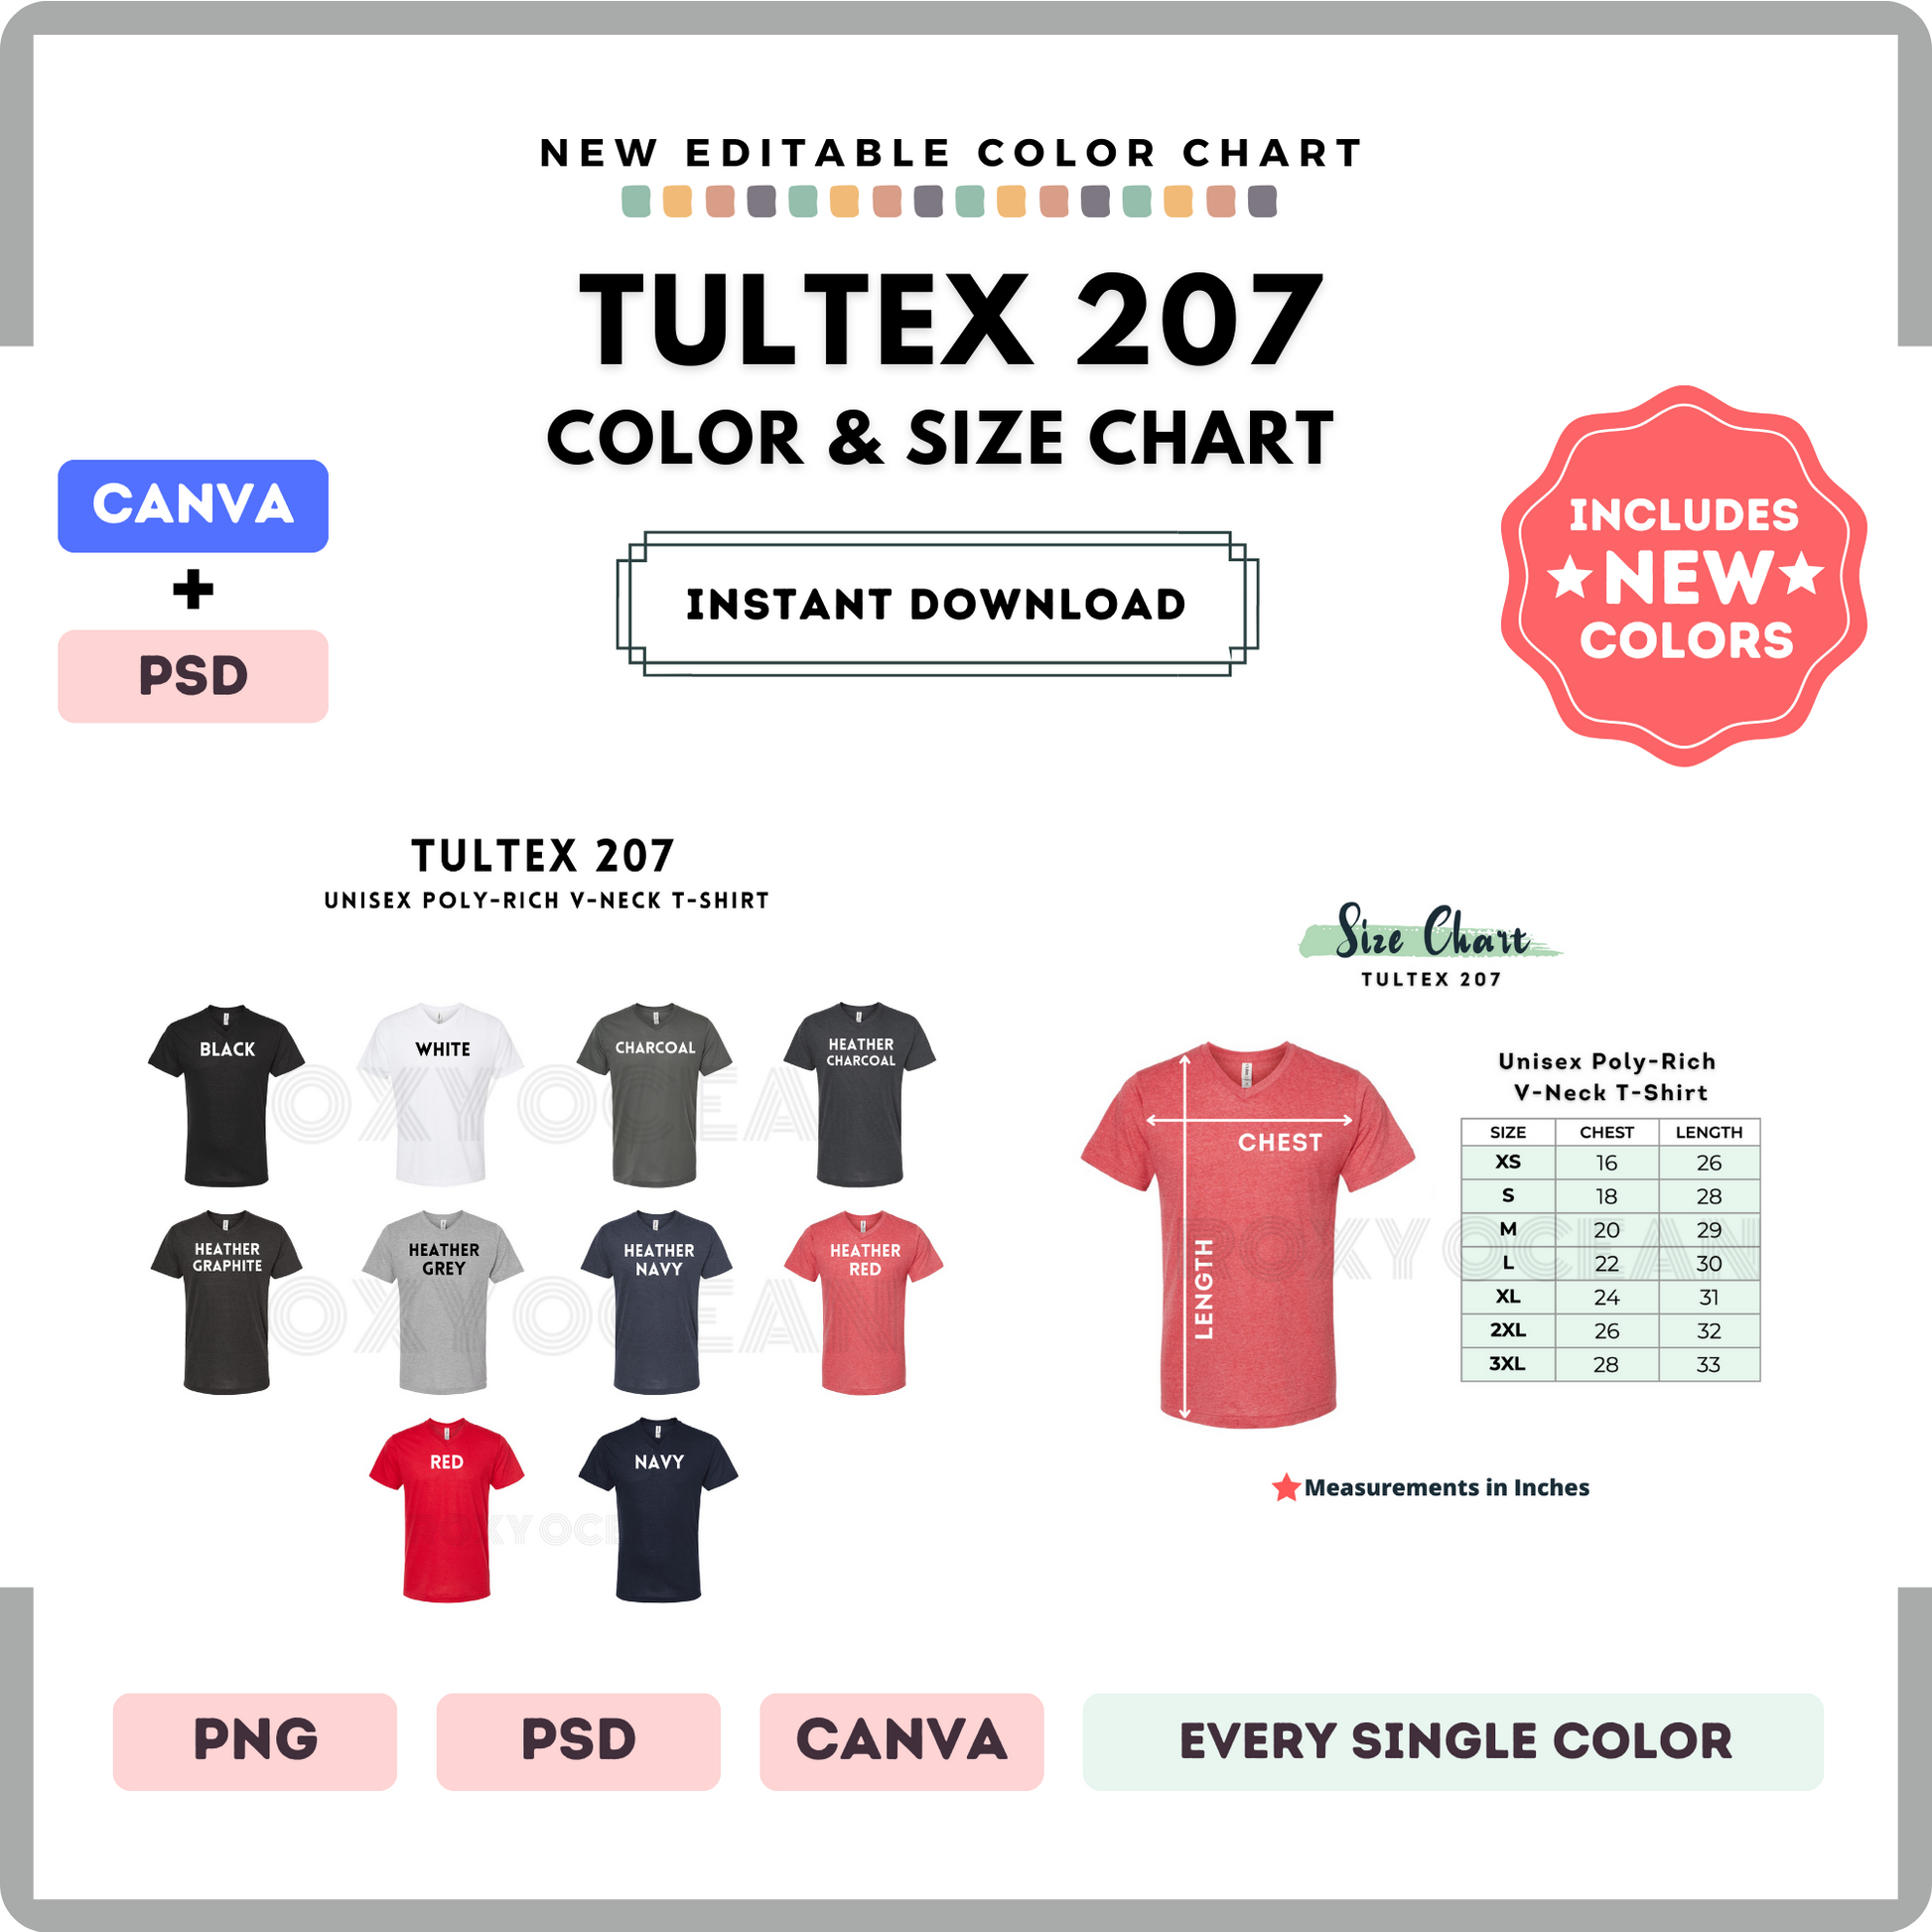 Tultex 207 Color and Size Chart